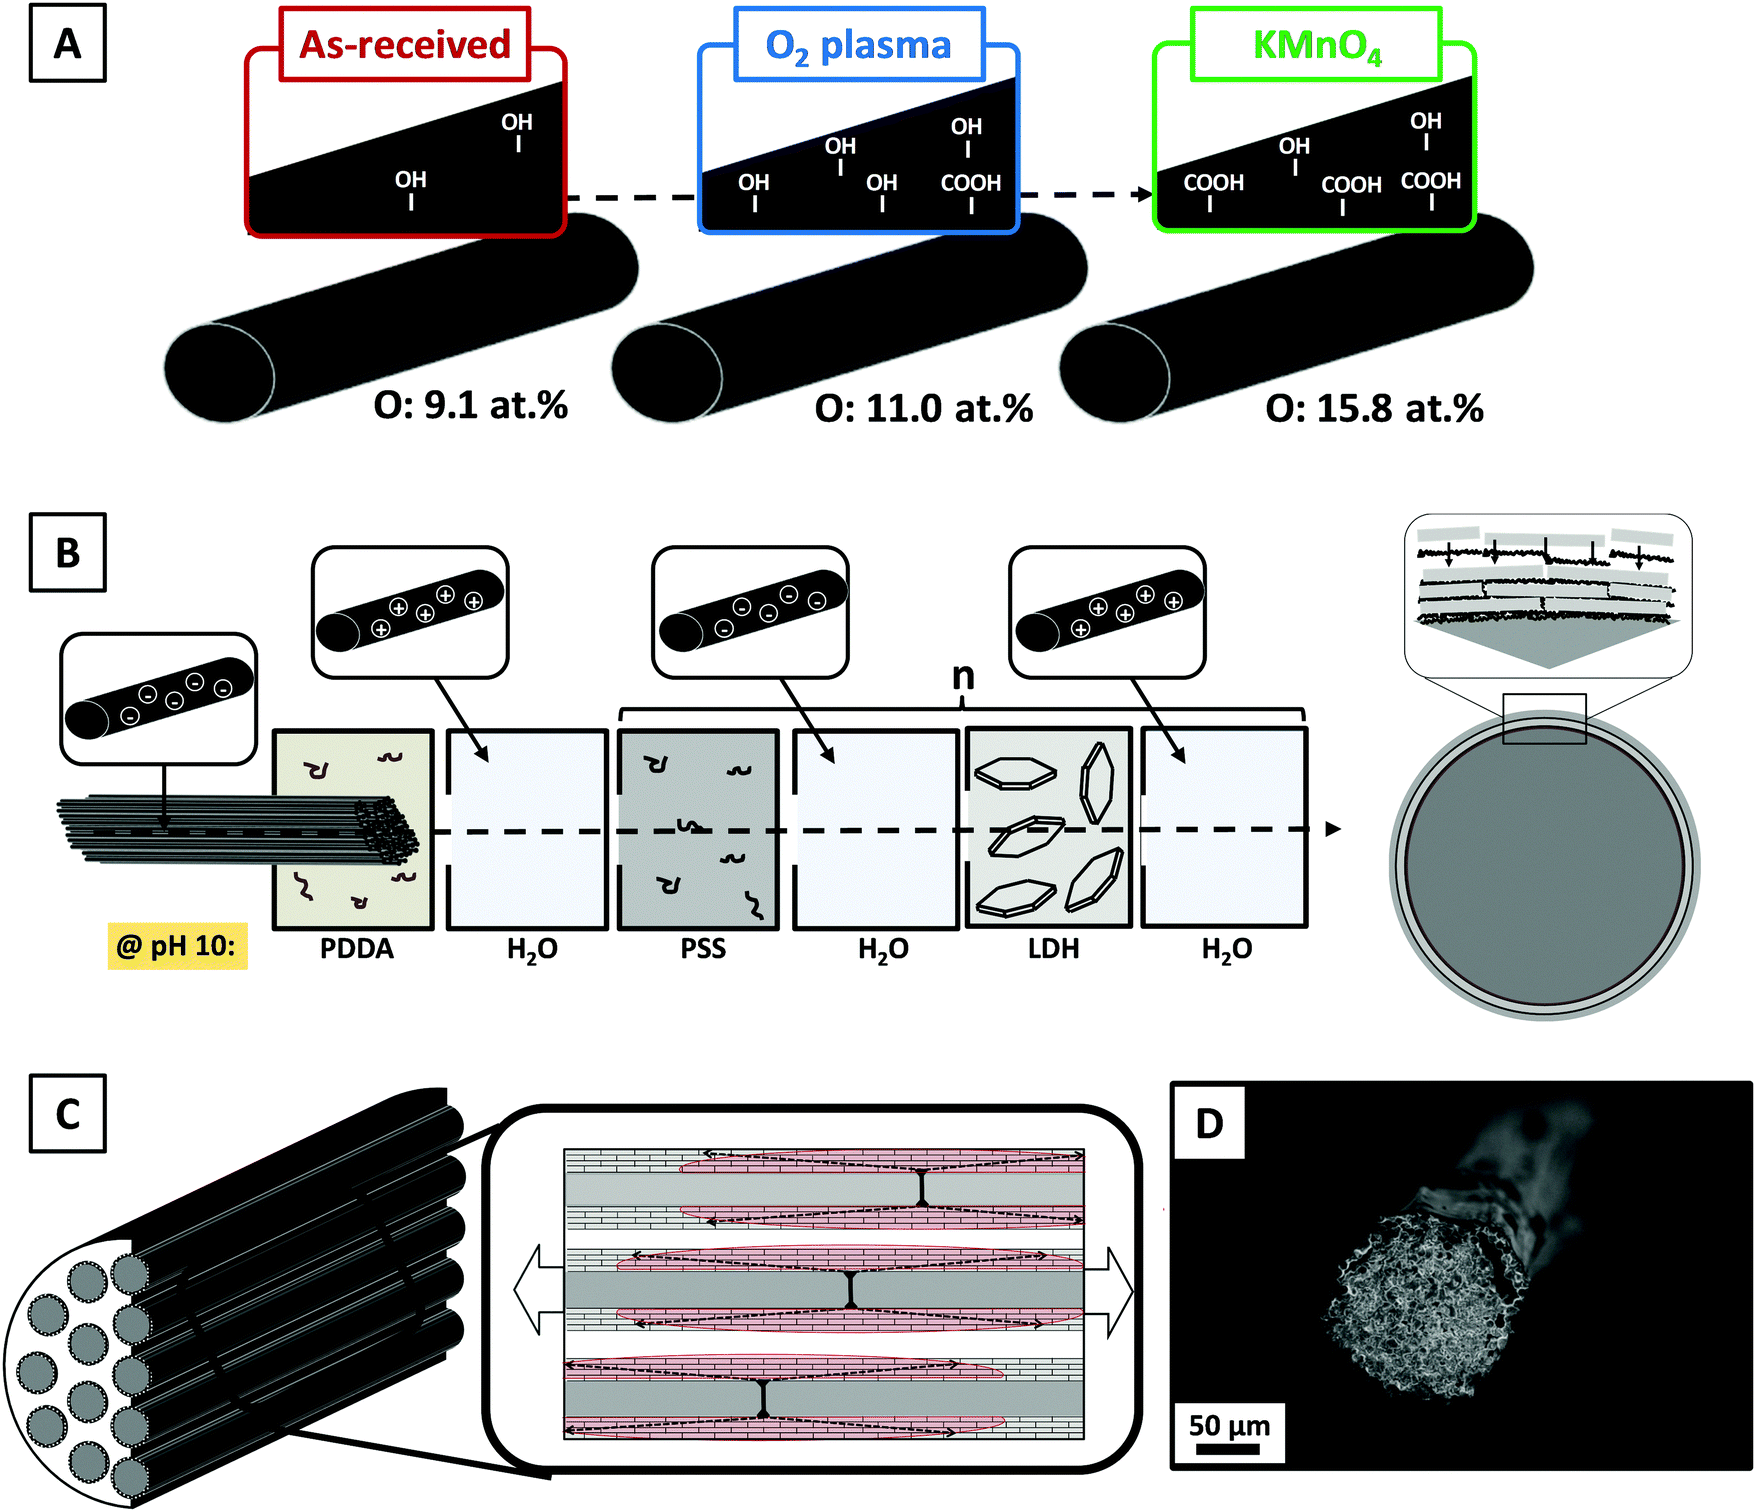 Increasing carbon fiber composite strength with a nanostructured  “brick-and-mortar” interphase - Materials Horizons (RSC Publishing)  DOI:10.1039/C7MH00917H